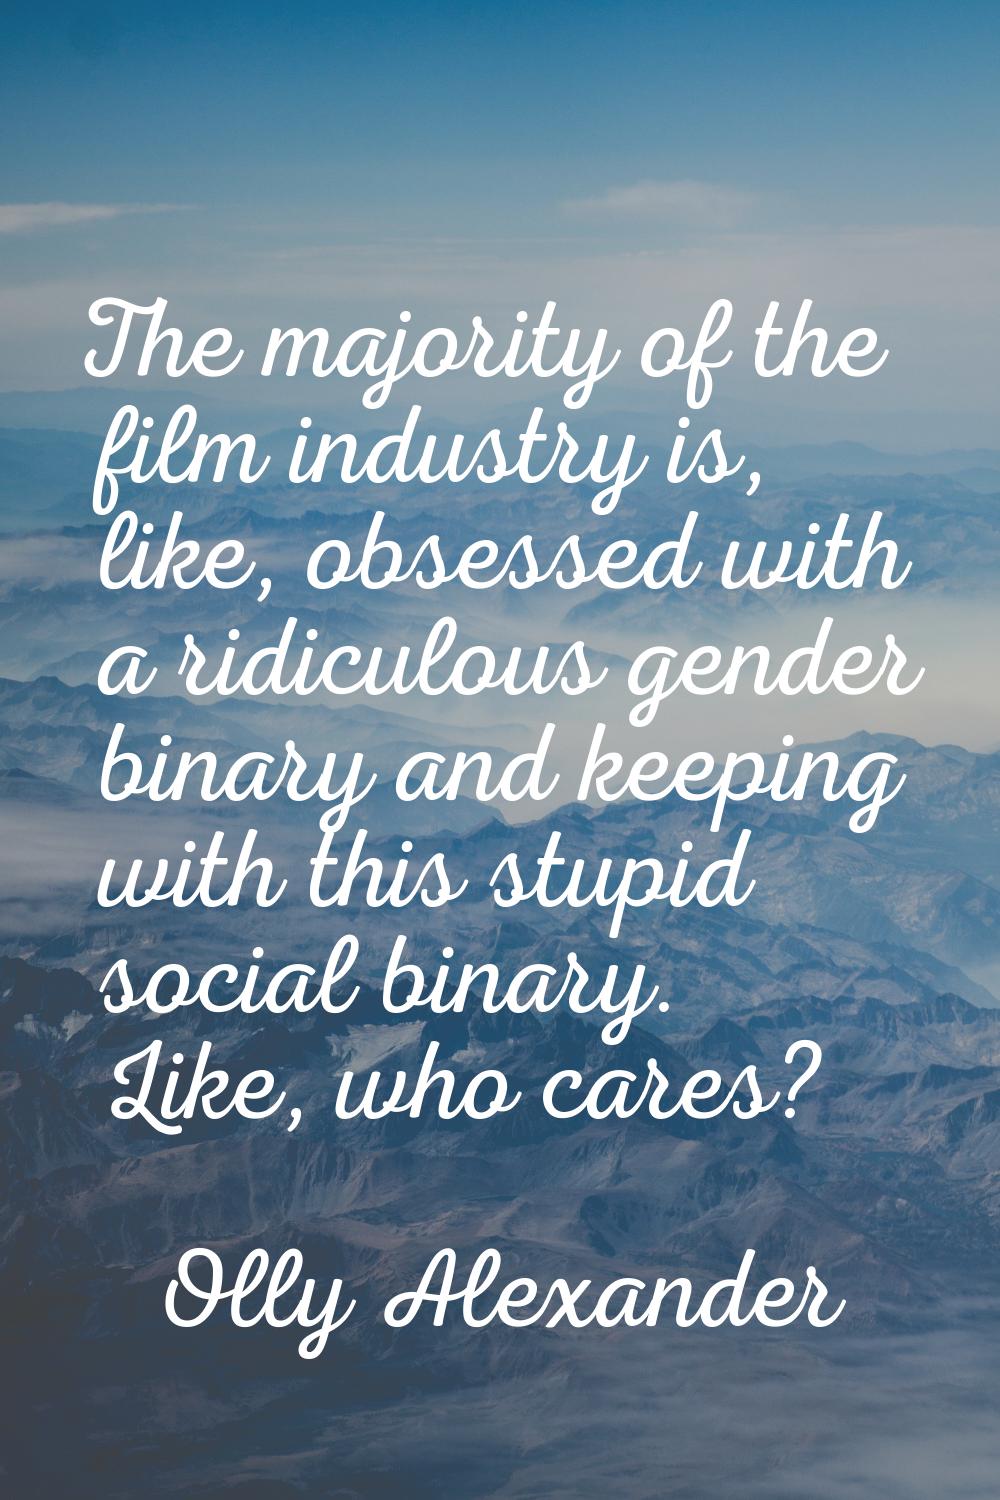 The majority of the film industry is, like, obsessed with a ridiculous gender binary and keeping wi